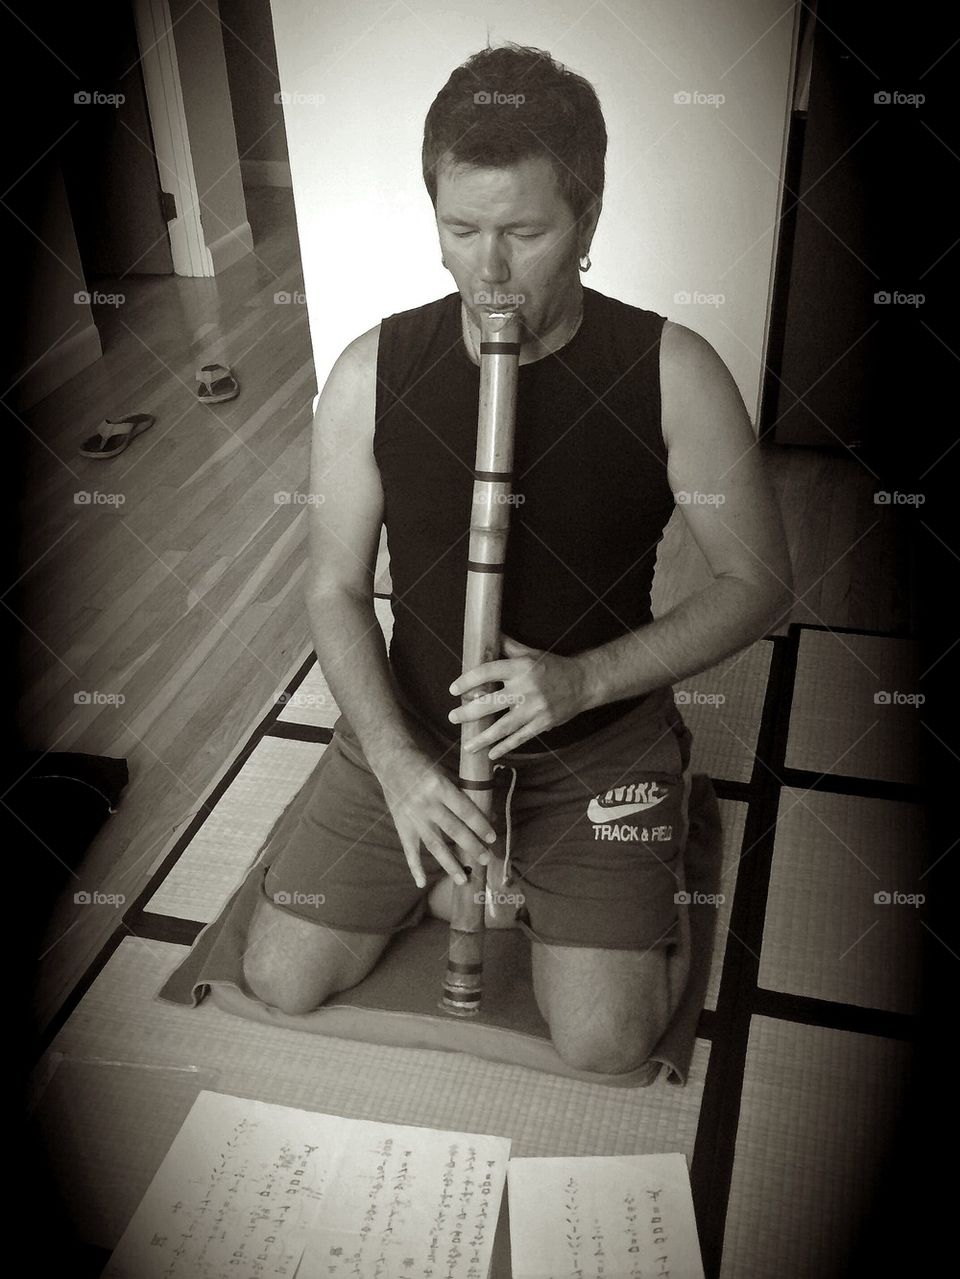 Playing flute